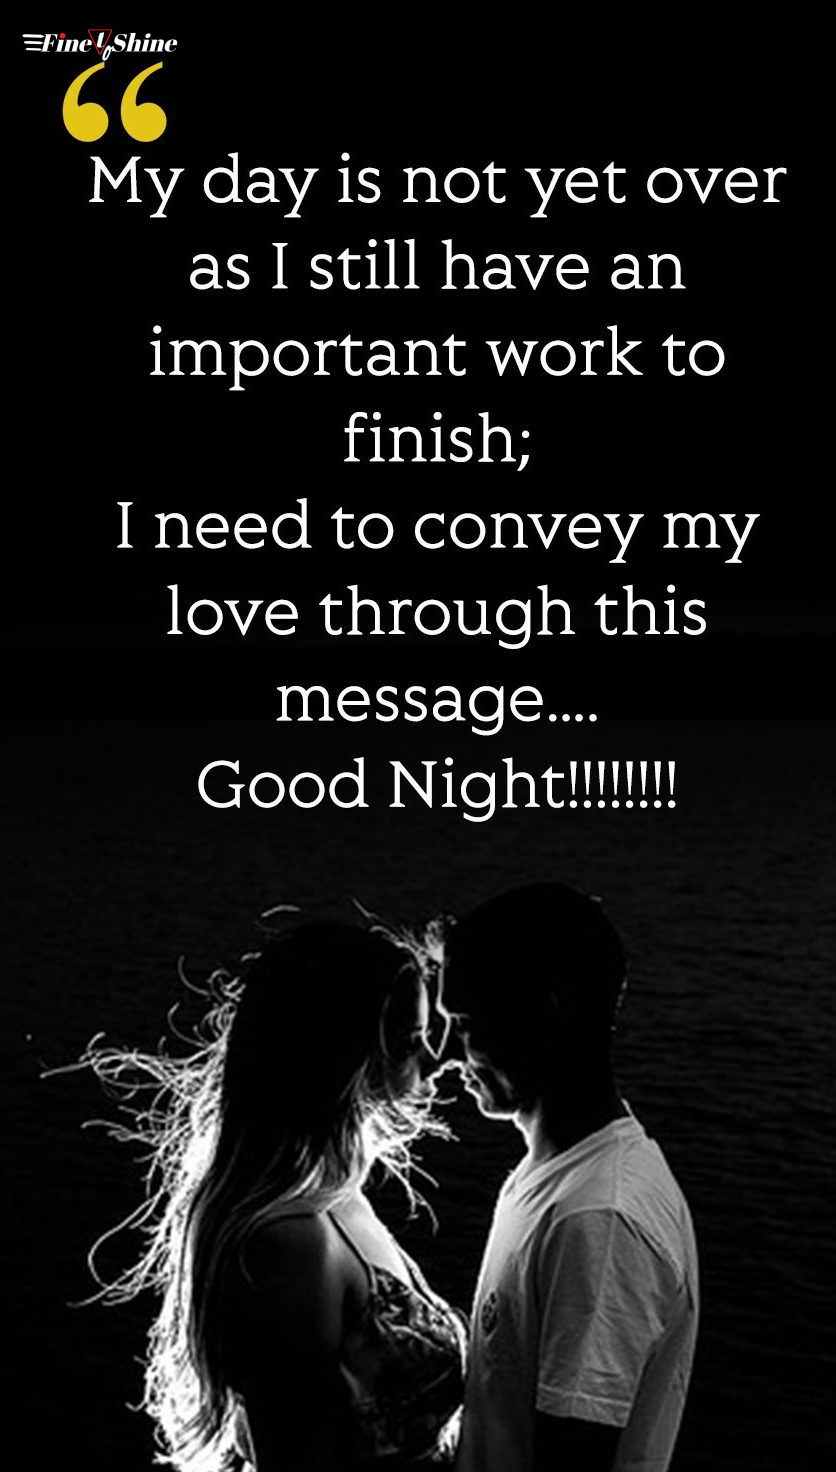 50+ Good Night Love Quotes, Sayings, Messages For Him/Her 2023